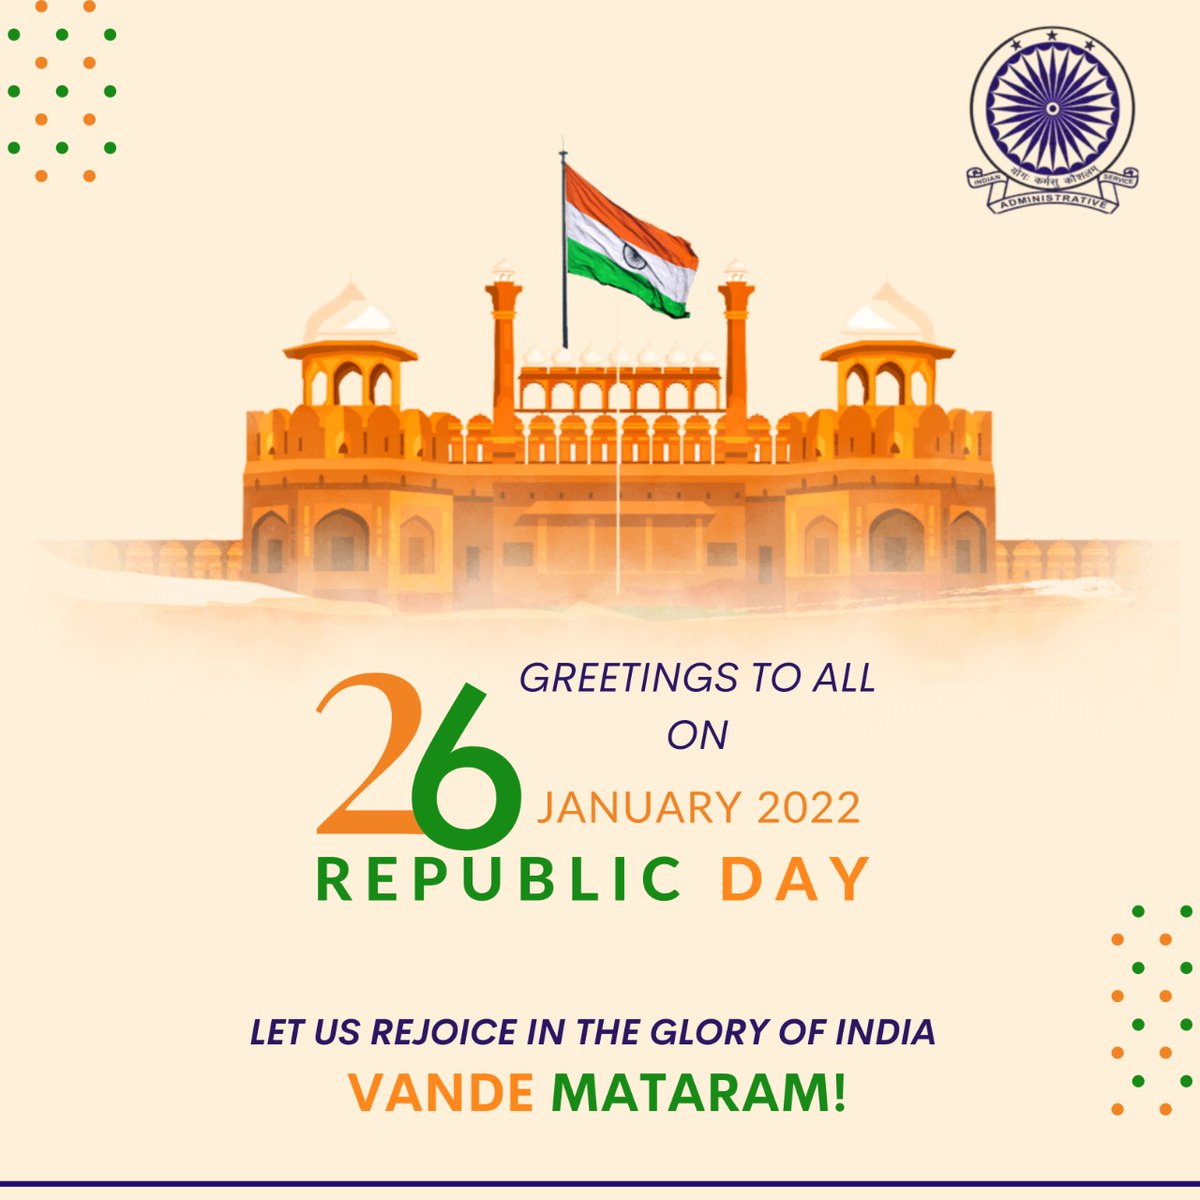 Best Wishes on 73rd Republic Day. Let's cherish the Constitution and adopt the ideals in our daily life. #RepublicDayIndia